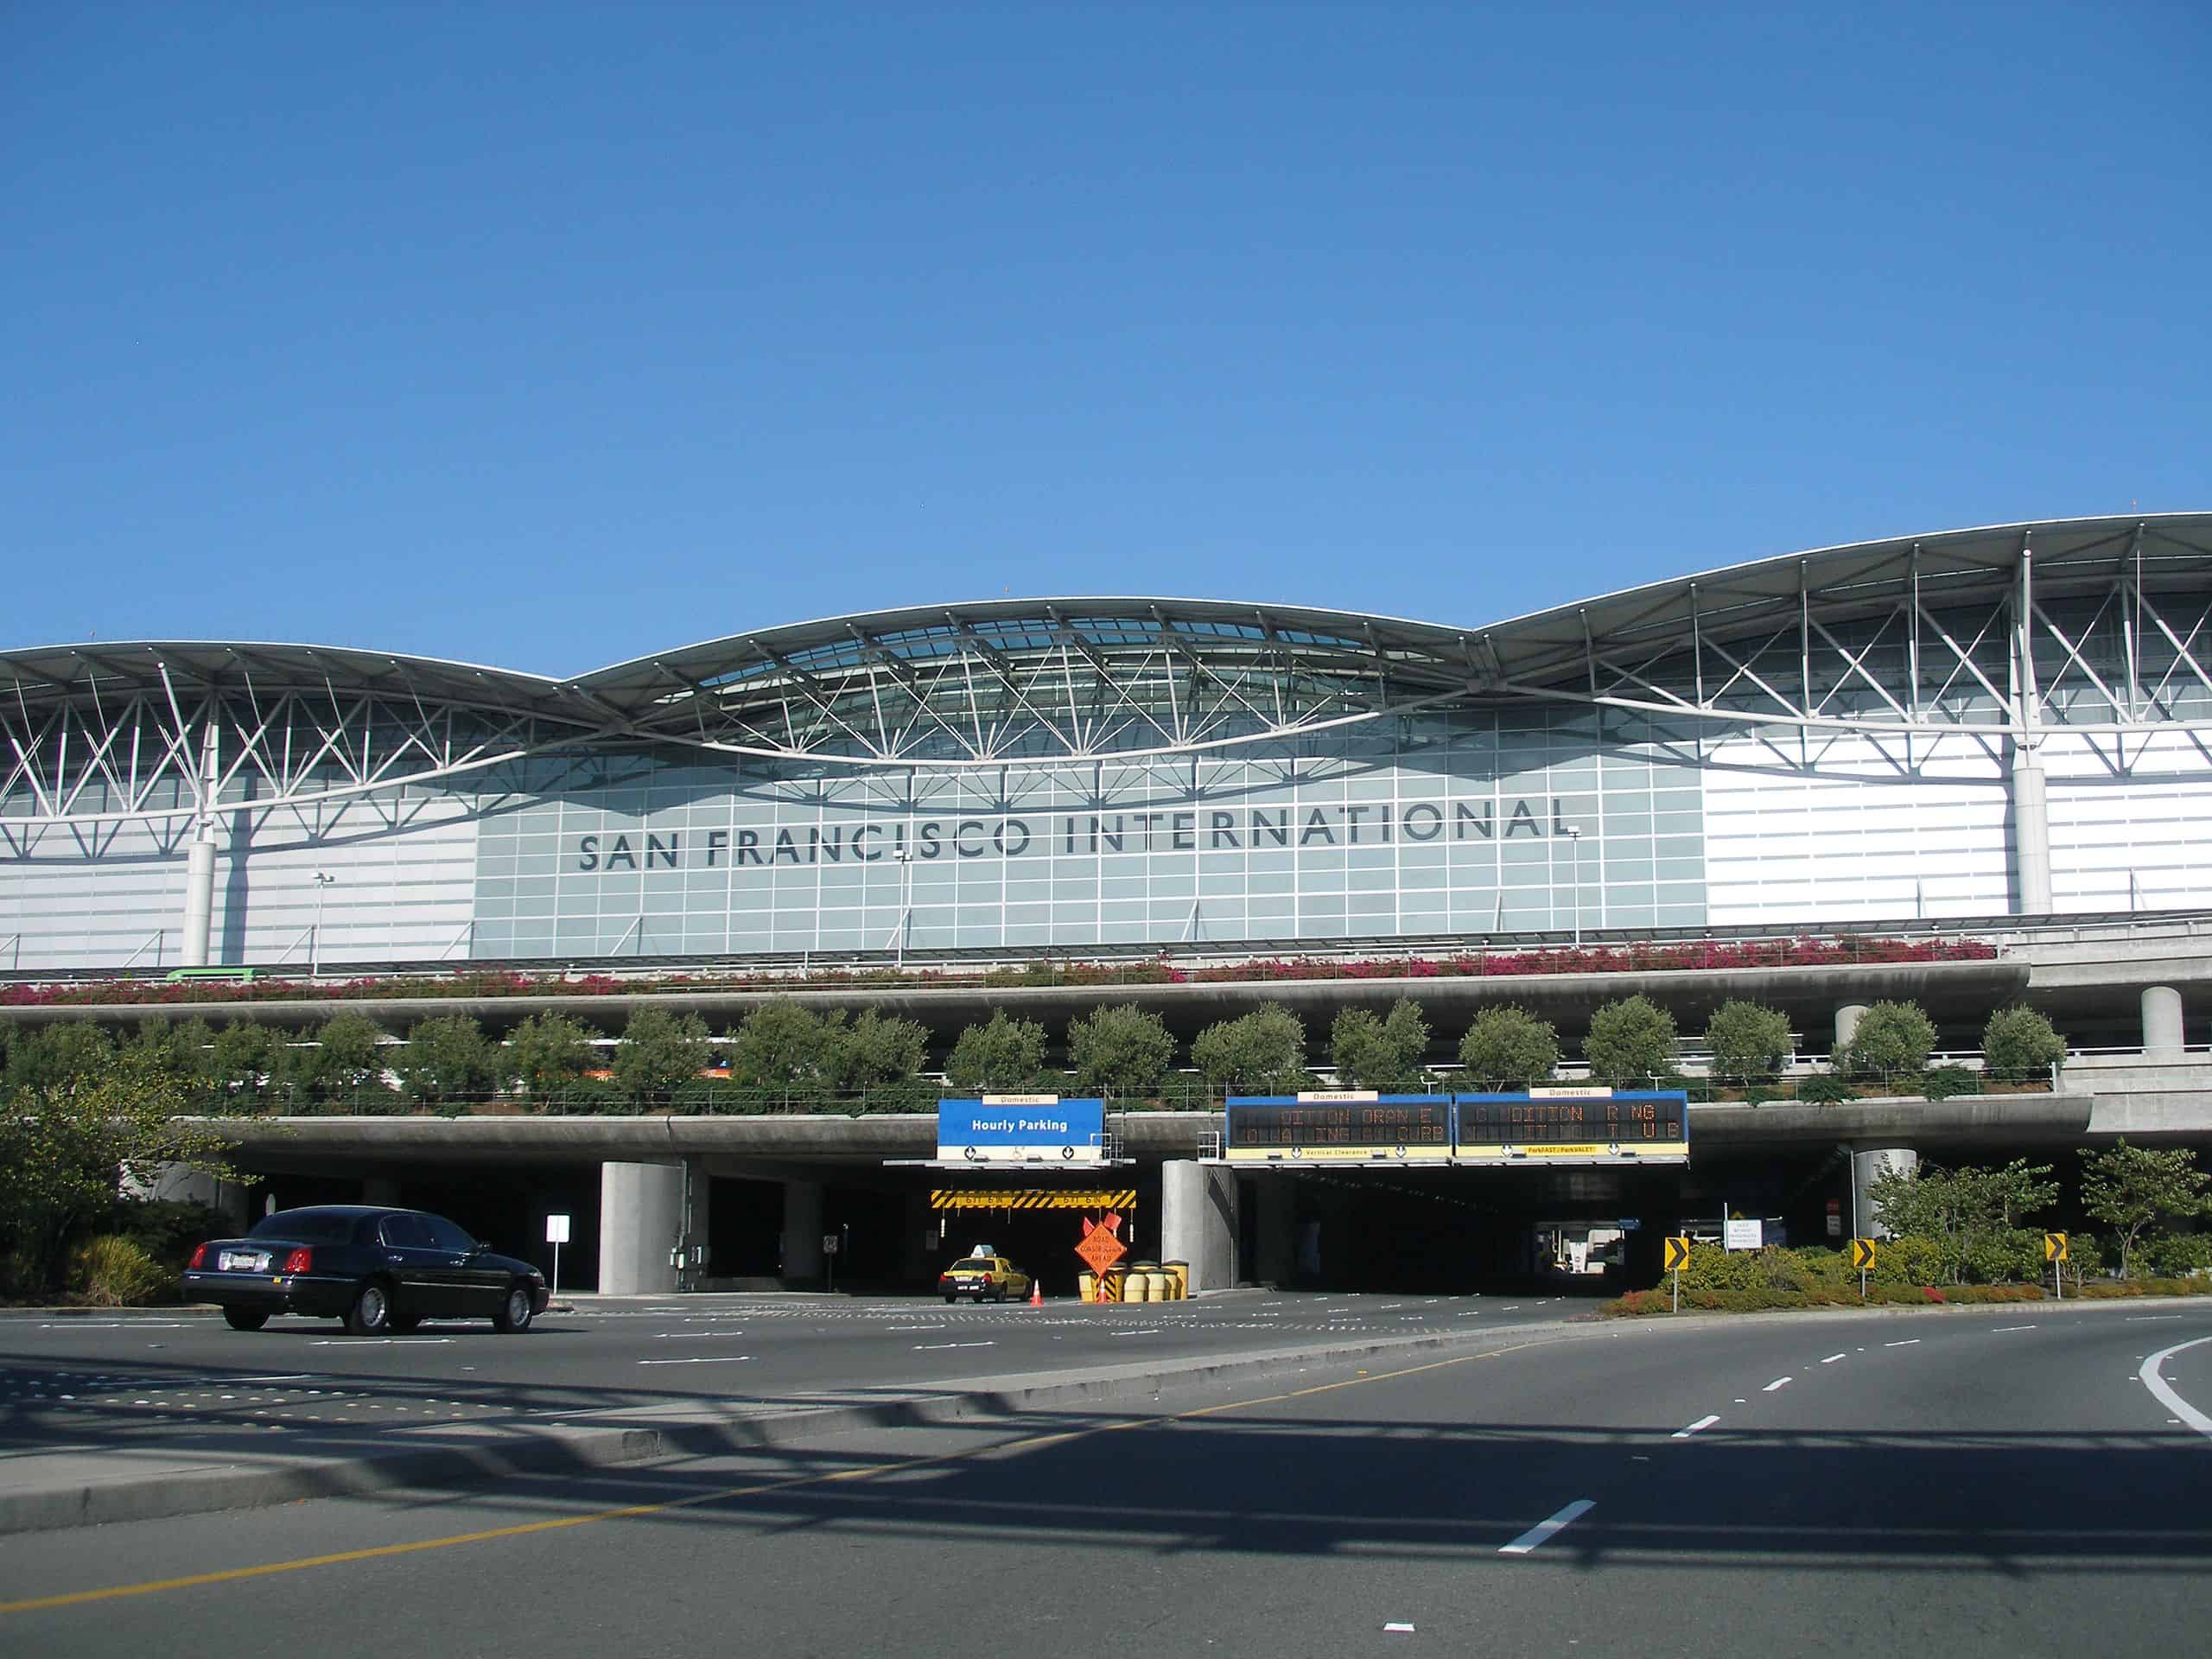 <p>Located 13 miles south of downtown San Francisco, the city's international airport is regarded as the best for food. All in total, you have around 80 different dining options that help reflect the vibrancy of the area's love for food. You can start by picking up pho at Bun Mee in Terminal 1 or walk over to Terminal 3 and find Sushi at Sankaku. If you need a coffee fix, head over to Roasting Plant Coffee. If you're looking for a vegan meal, Amy's Drive Thru offers gluten-free, vegan, and veggie dishes in Terminal 1.</p> <p>Agree with this? Hit the Thumbs Up button above. Disagree? Let us know in the comments with what you'd change.</p>